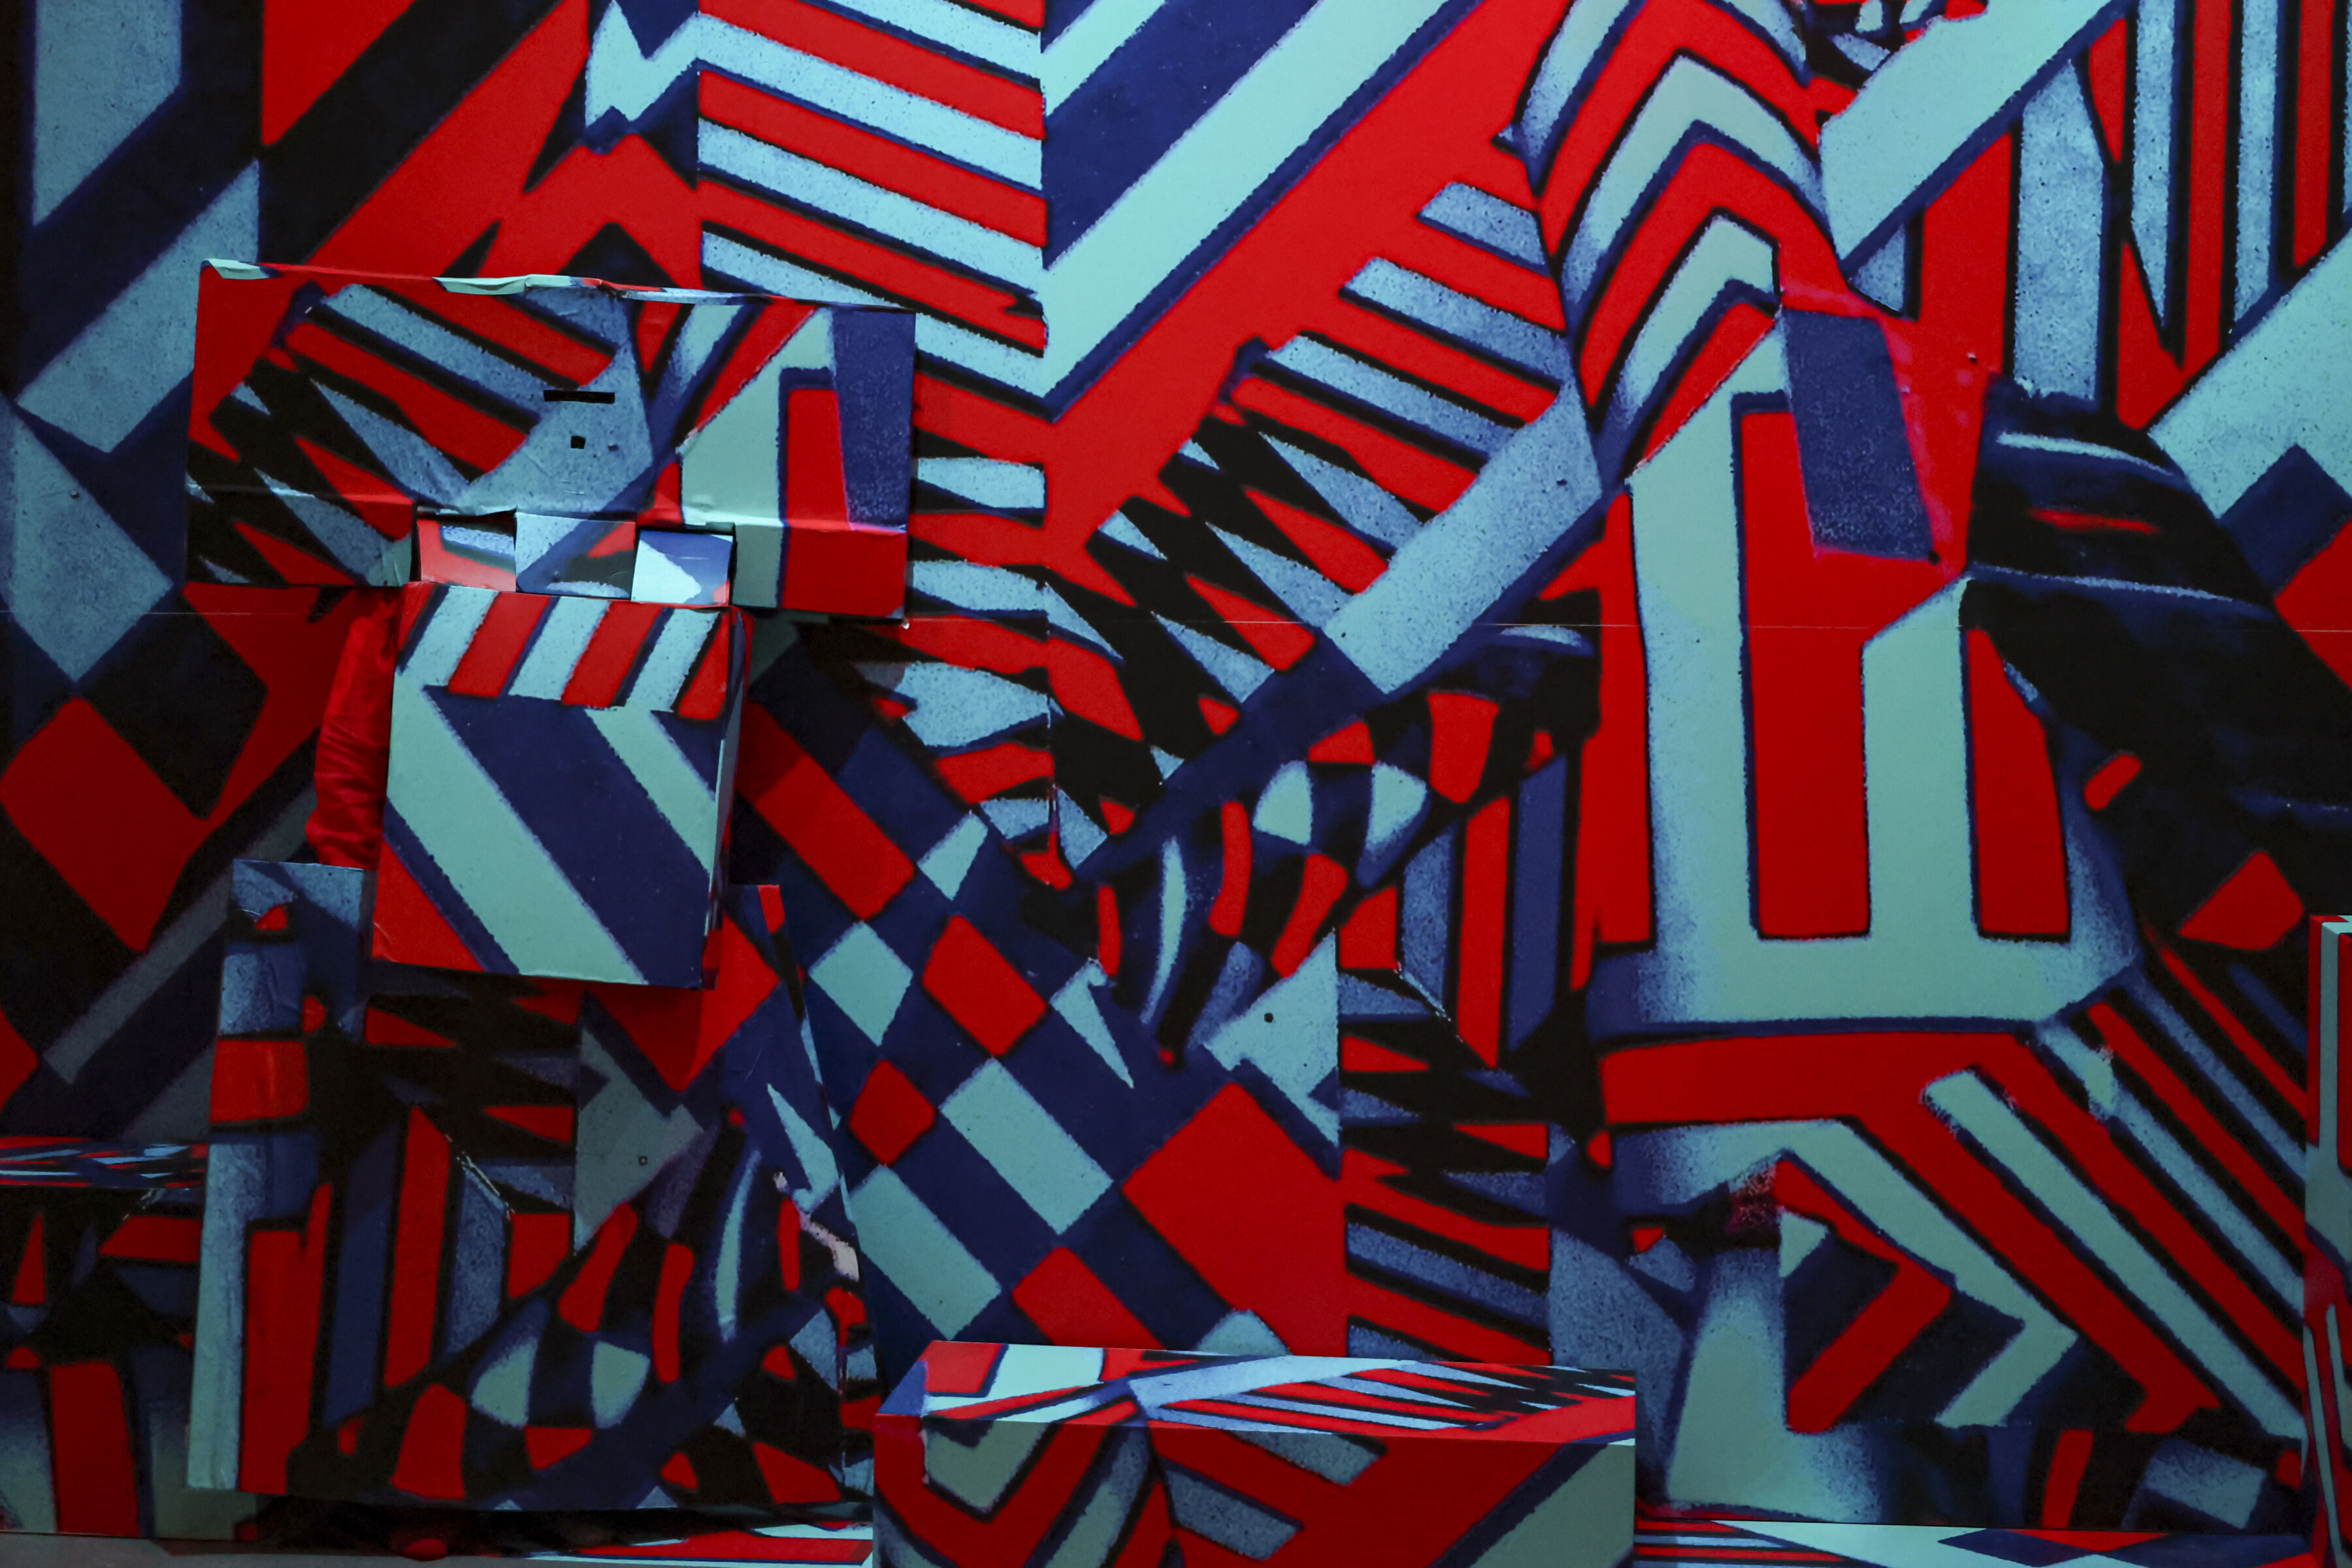 This image shows artist Aaron Williamson performing Hiding in 3D against a blue and red geometric design.